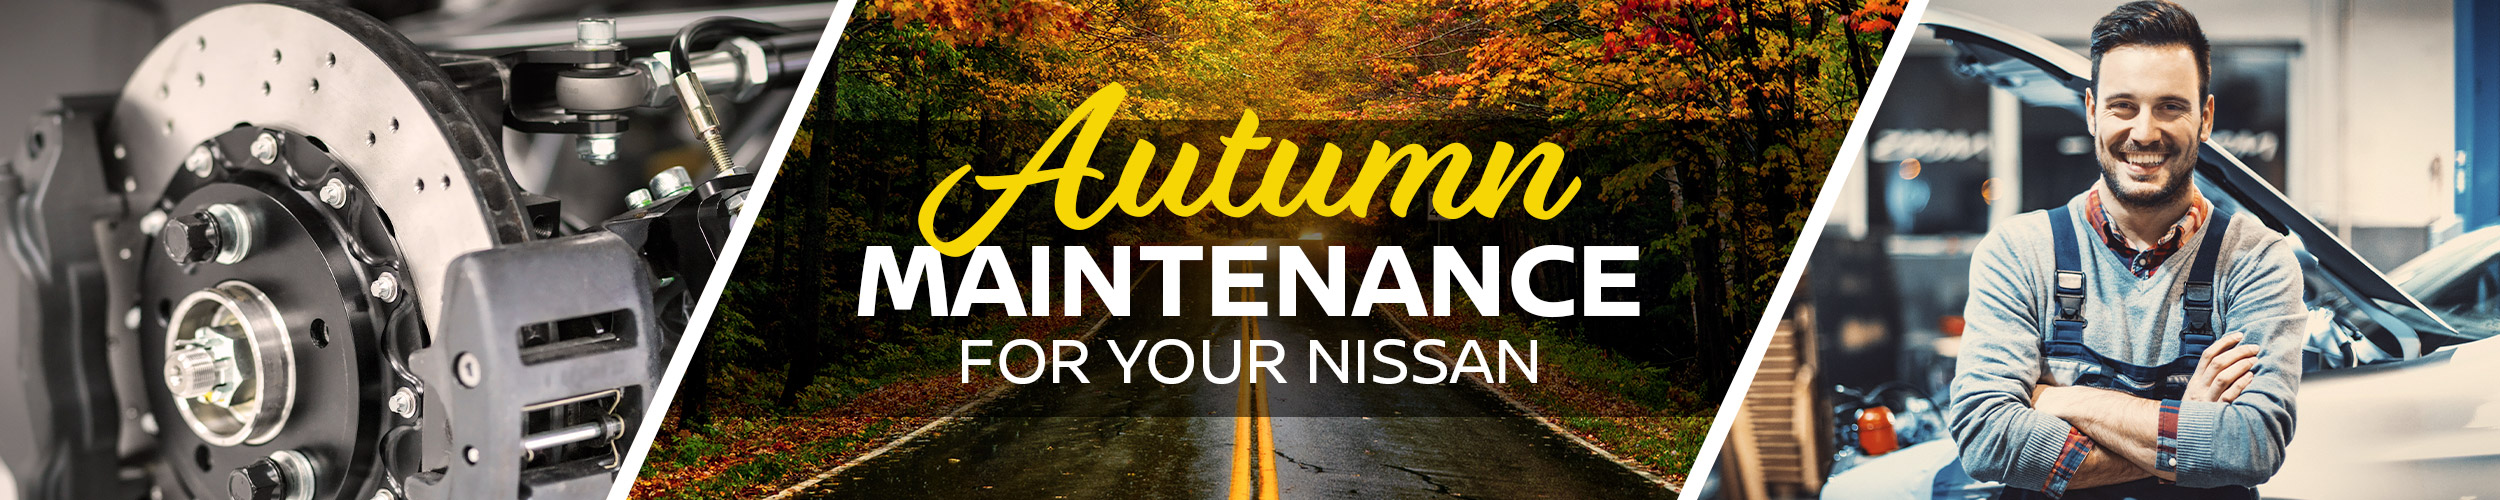 Fall Nissan Maintenance At Galesburg Nissan In Galesburg, IL